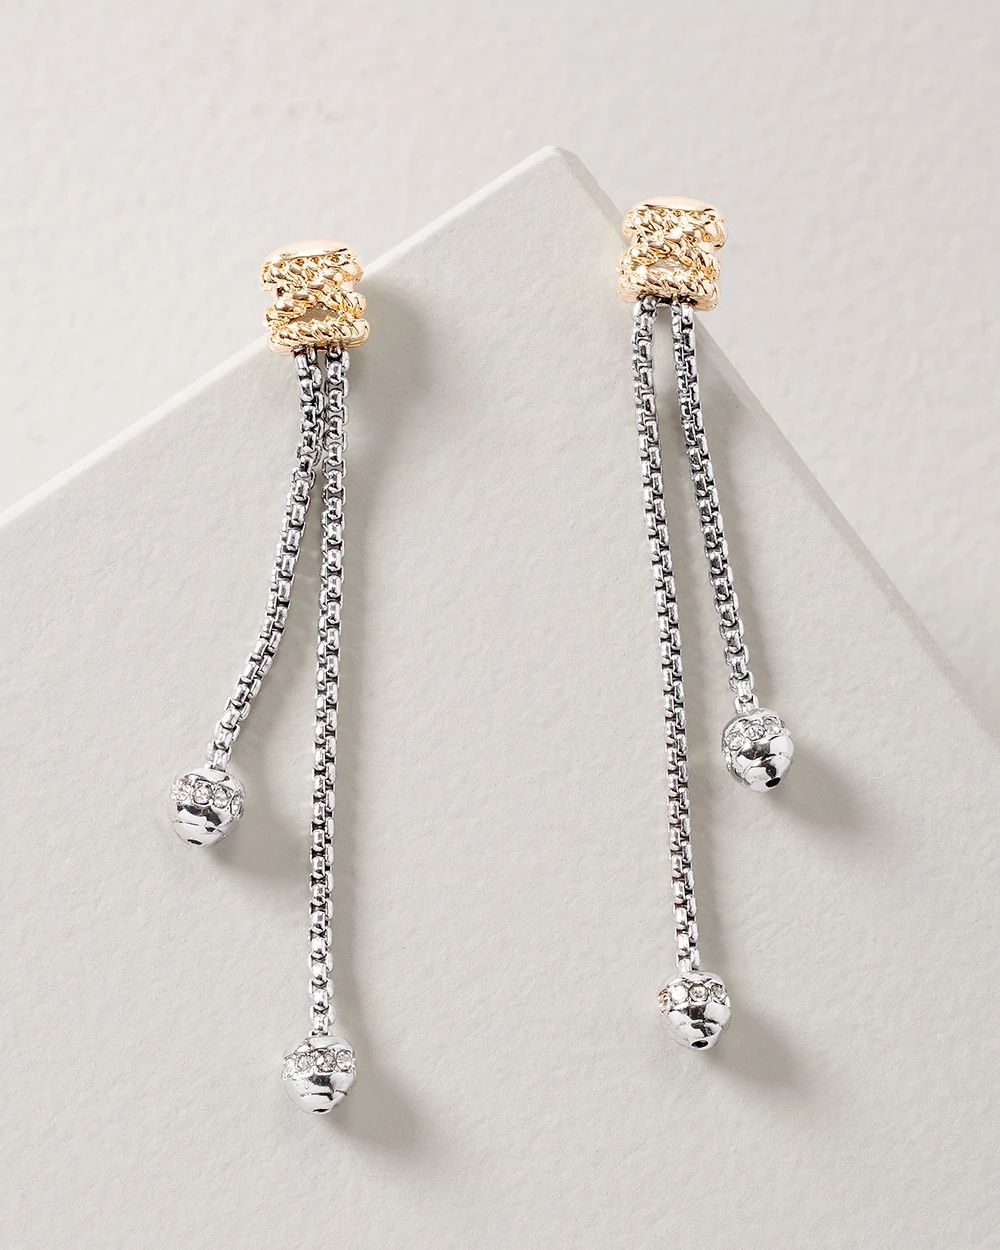 Mixed-Metal Rope Linear Earrings click to view larger image.